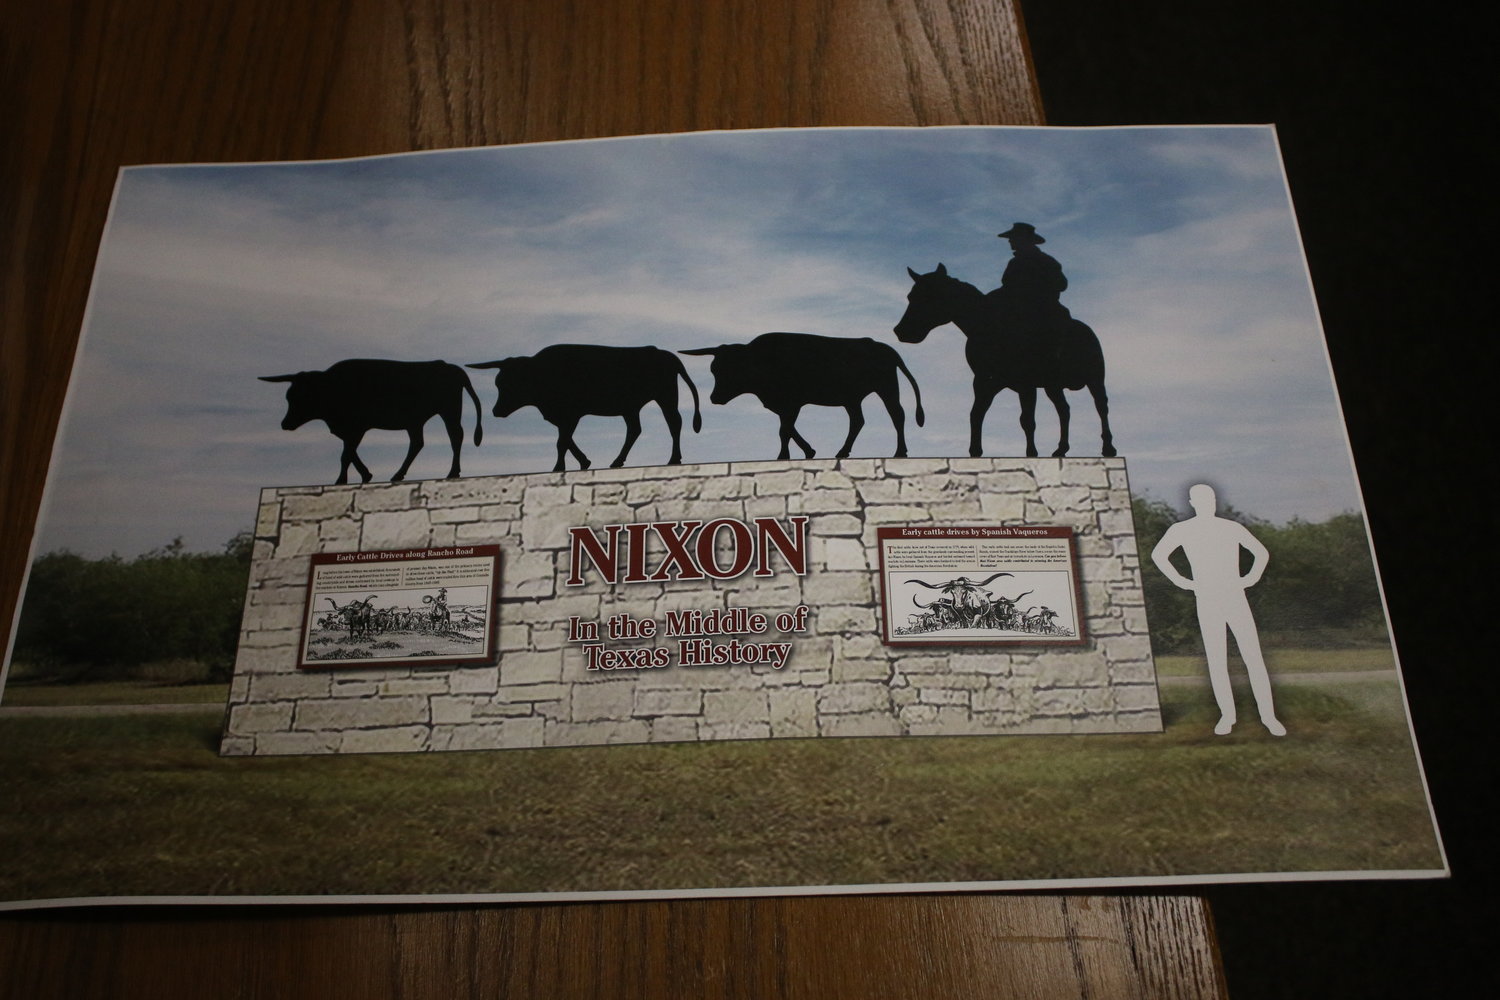 Artist renderings show two possible entrance monuments that would be erected outside a potential Ranch Nixon Historical Association museum to honor the cowboy and ranching heritage of the Nixon area.